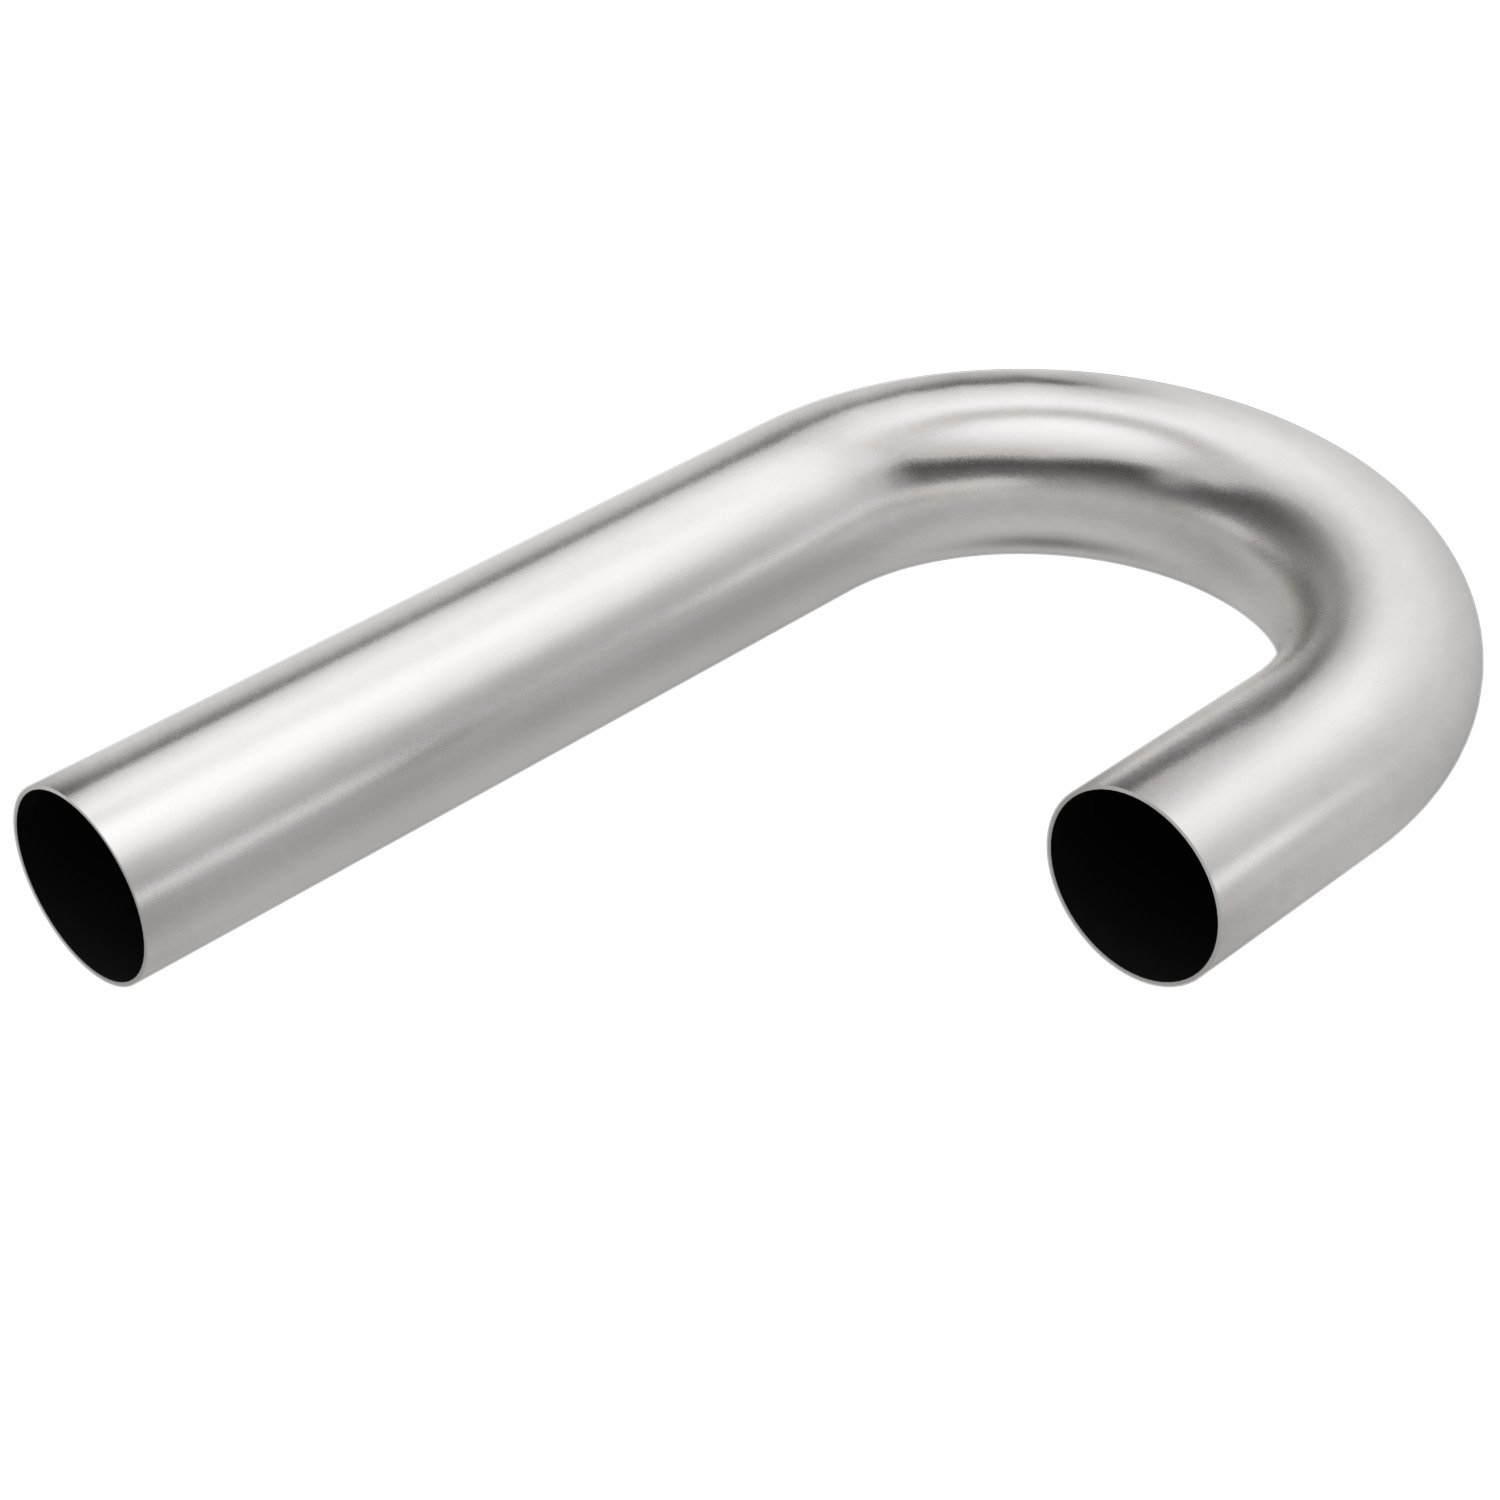 Stainless Steel 180° Transition Exhaust Pipe Outside Diameter: 2.5"